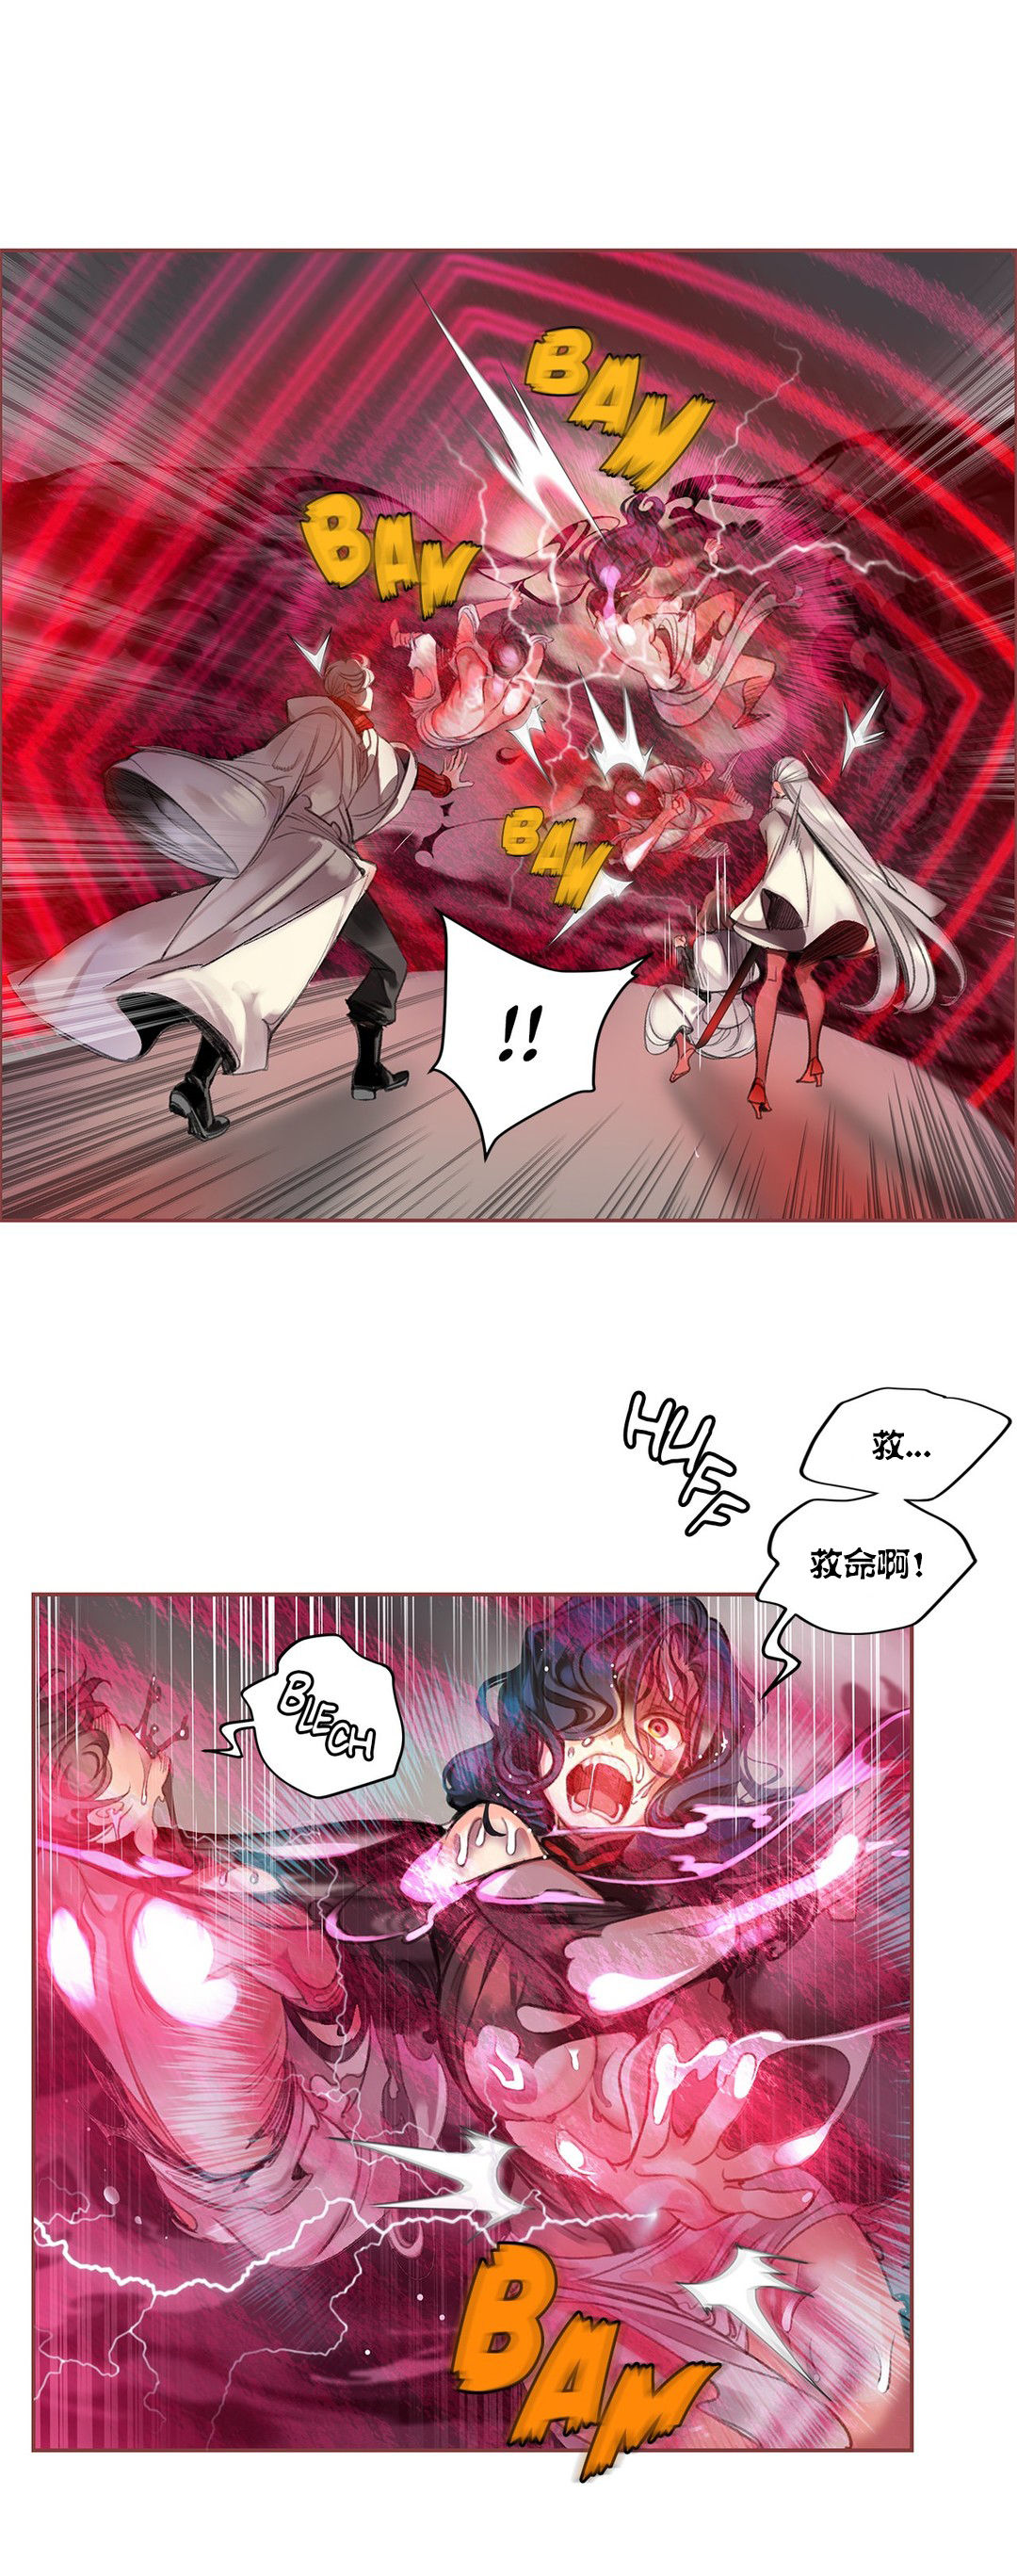 [Juder] Lilith`s Cord (第二季) Ch.61-64 [Chinese] [aaatwist个人汉化] [Ongoing] page 24 full